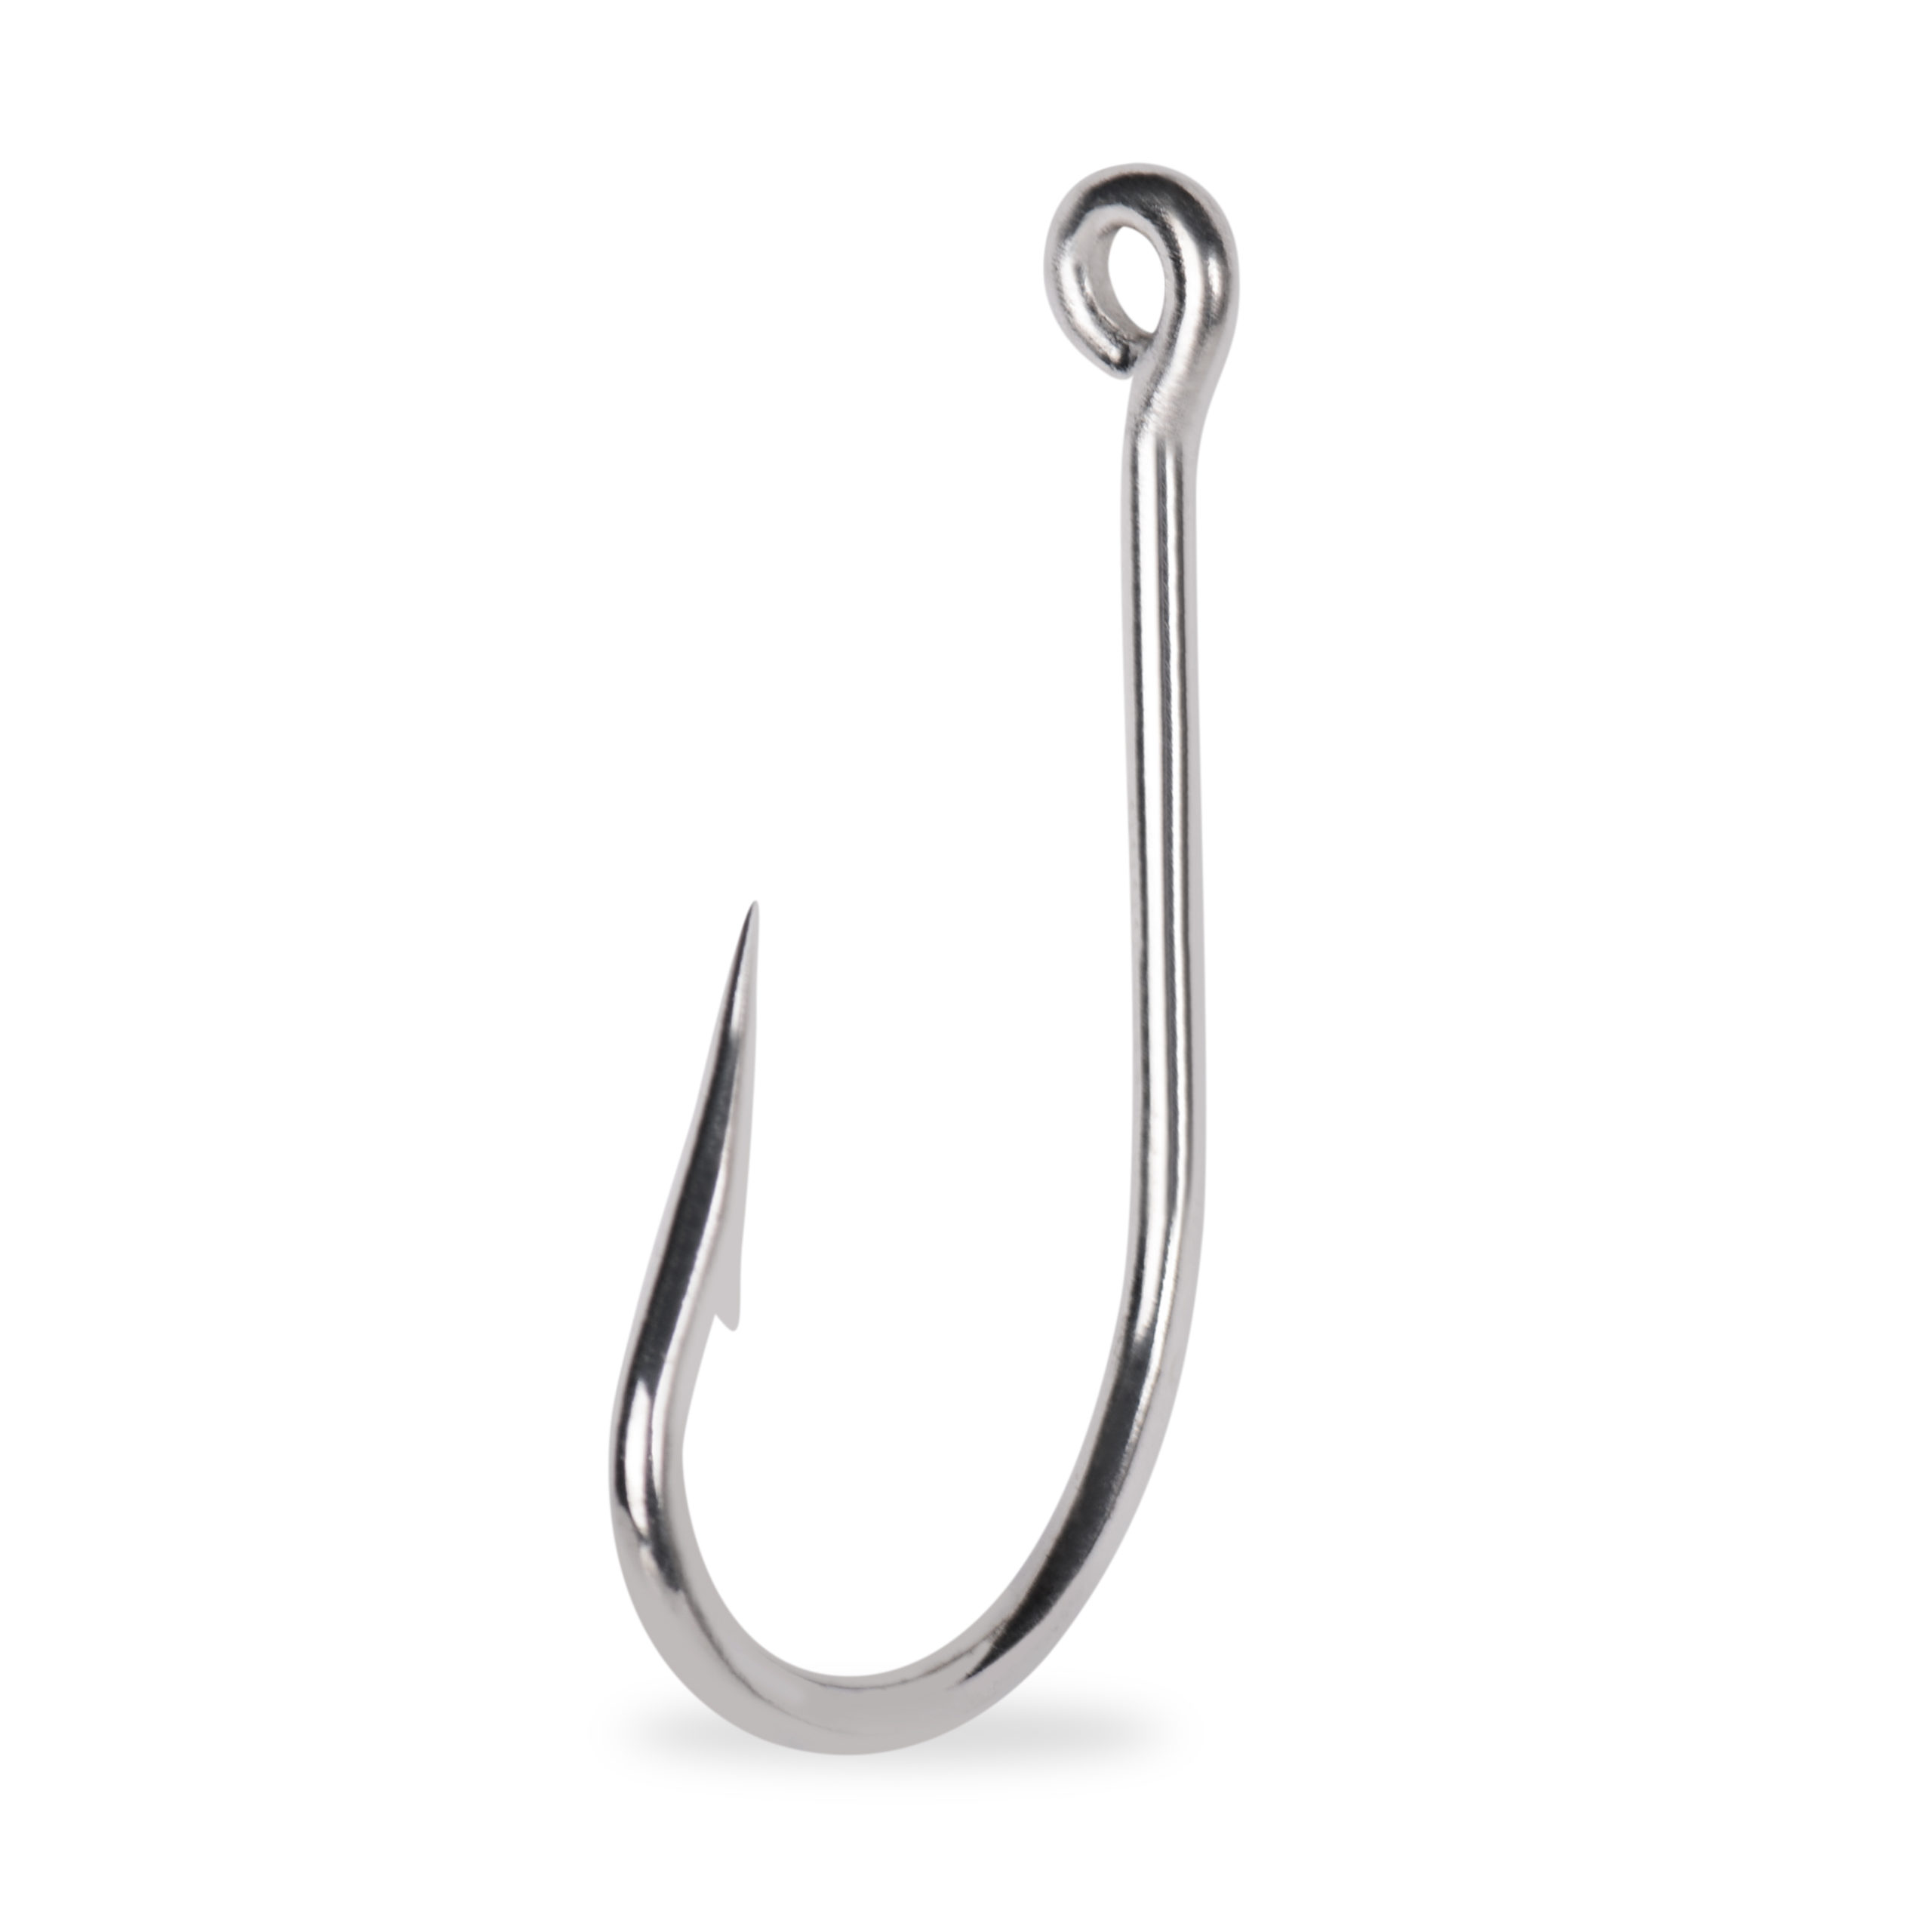 Mustad Stainless Southern & Tuna Hook 7691S 8/0 10ct